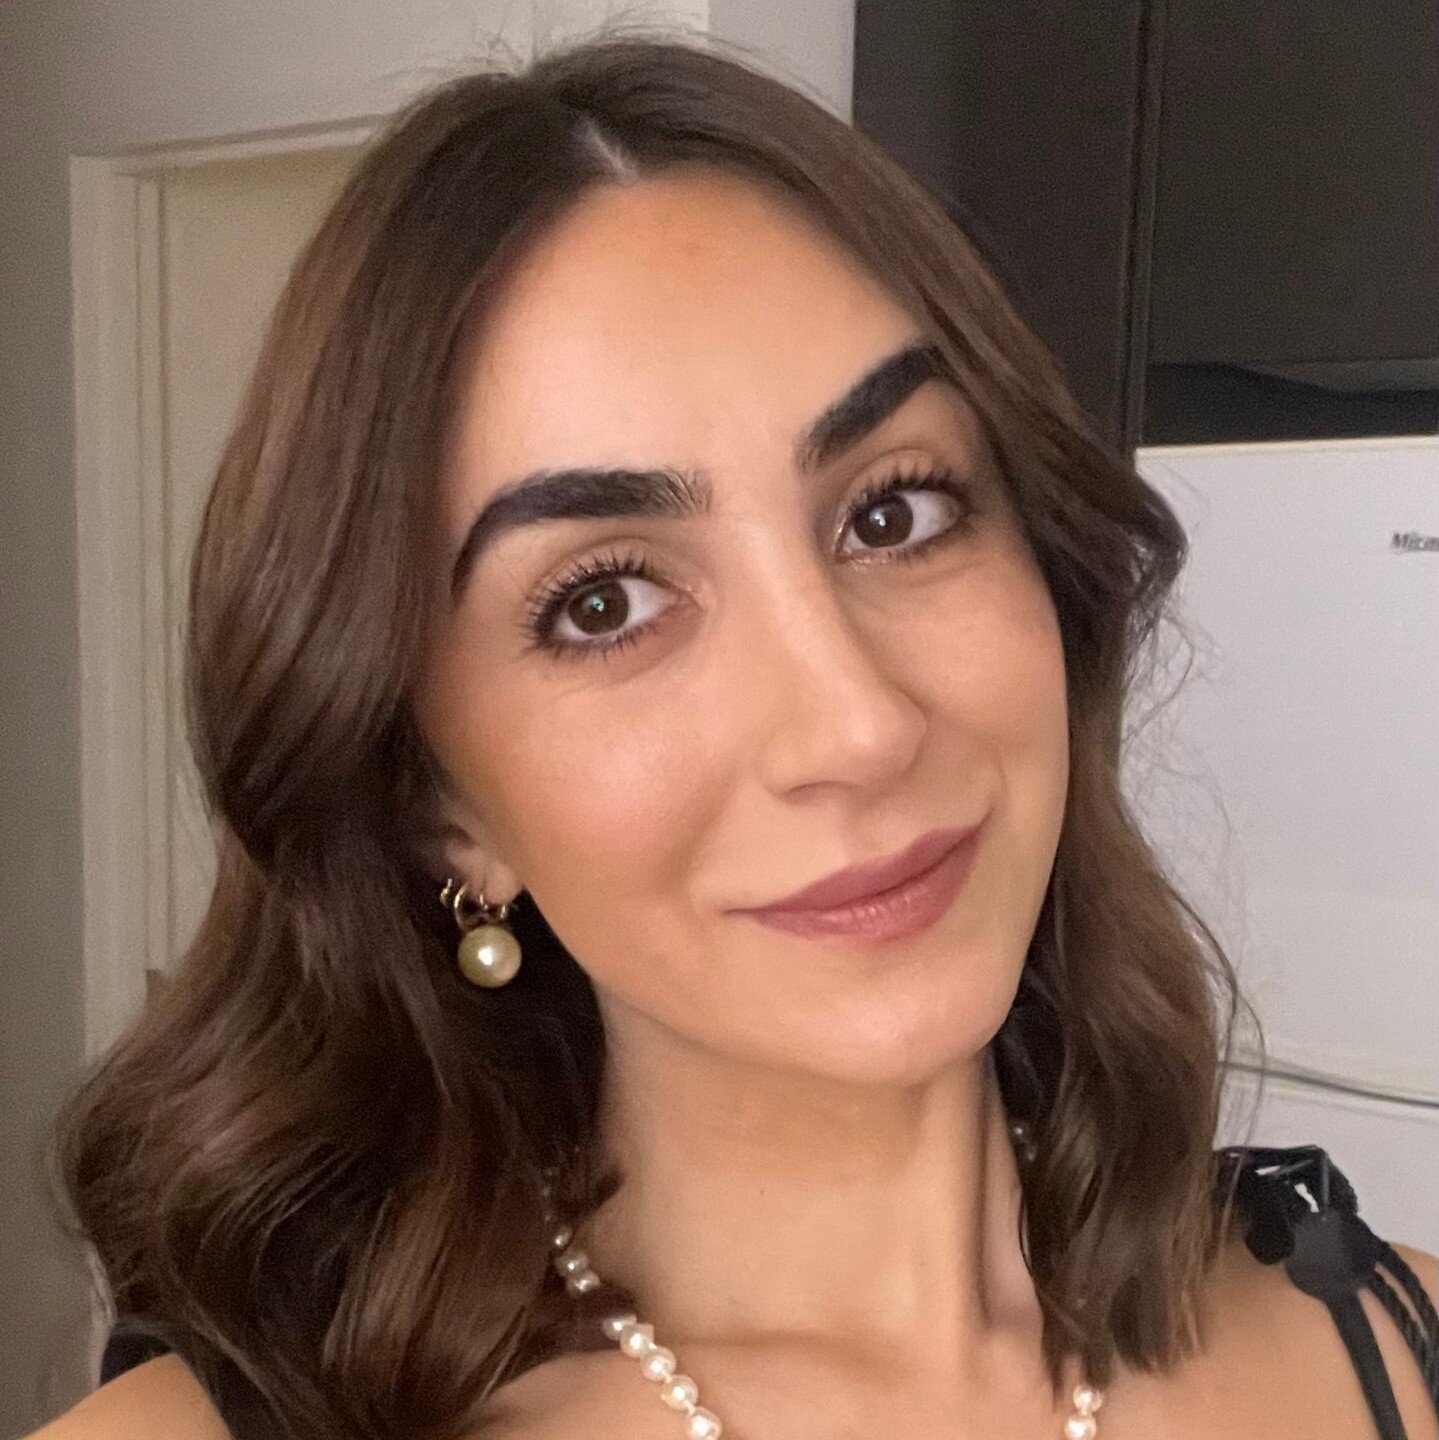 A face to the business 🔔 We have had a few new followers recently and thought It would be a good idea to put a face to Nue Beauty!⁠
⁠
Meet the owner and founder of Nue Beauty, Sarah 🎀.⁠
Sarah started Nue Beauty three years ago from home two salons 